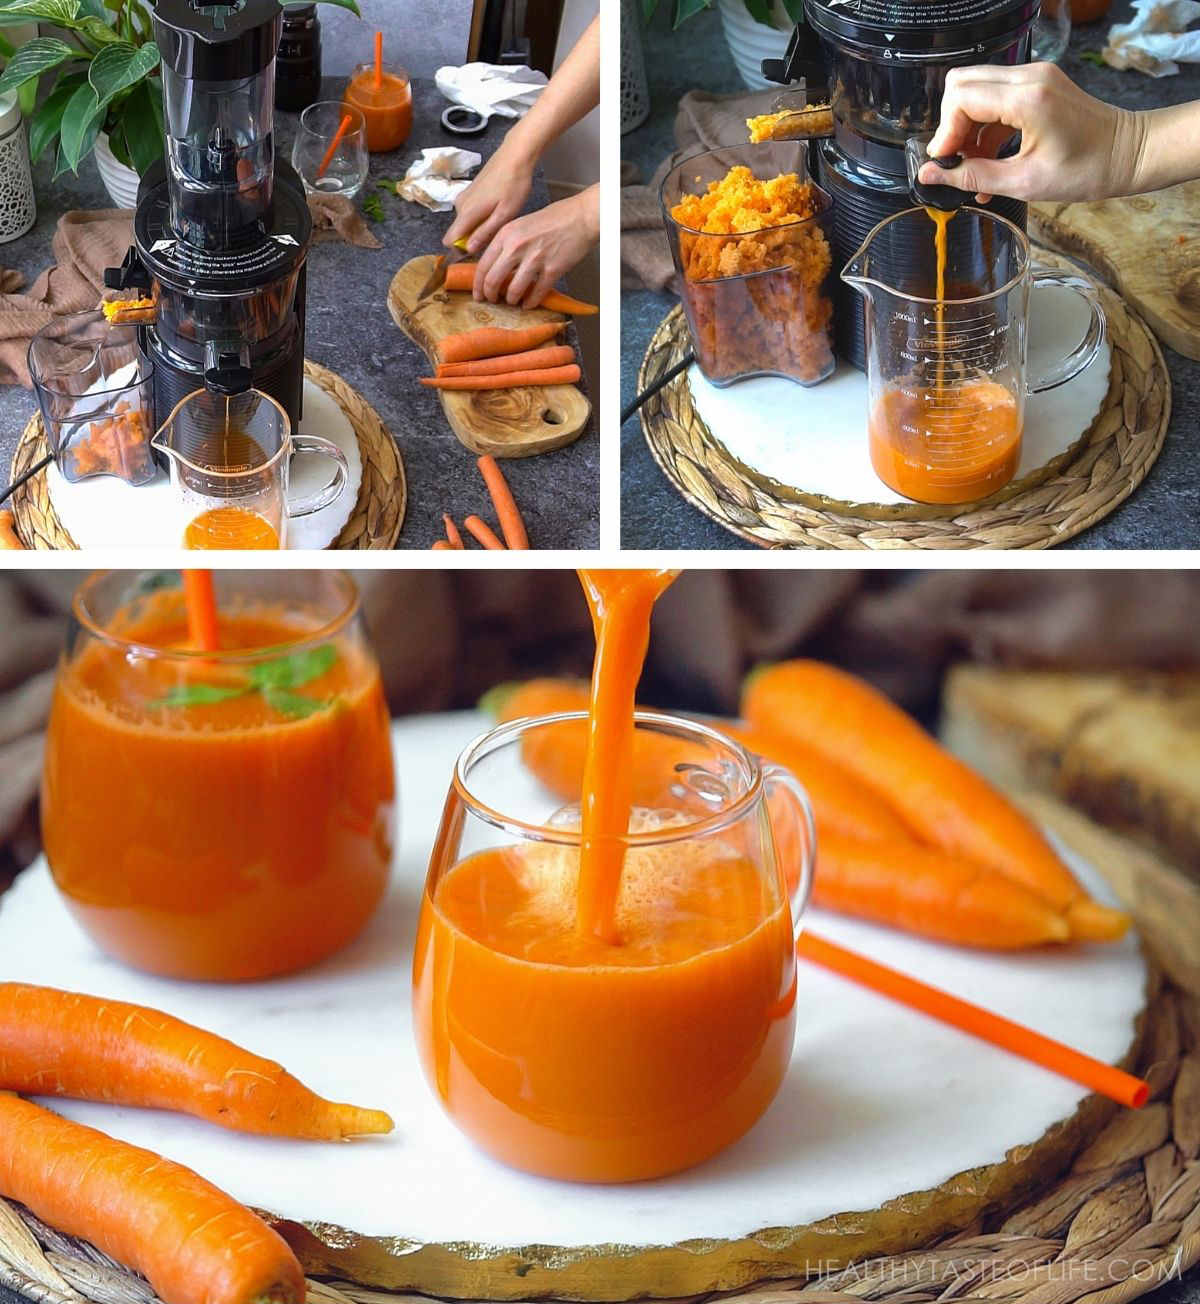 Process shots showing how to make carrot juice with a juicer, and what's the best carrot juicer (best juicer for carrots). Carrot juicer recipe.